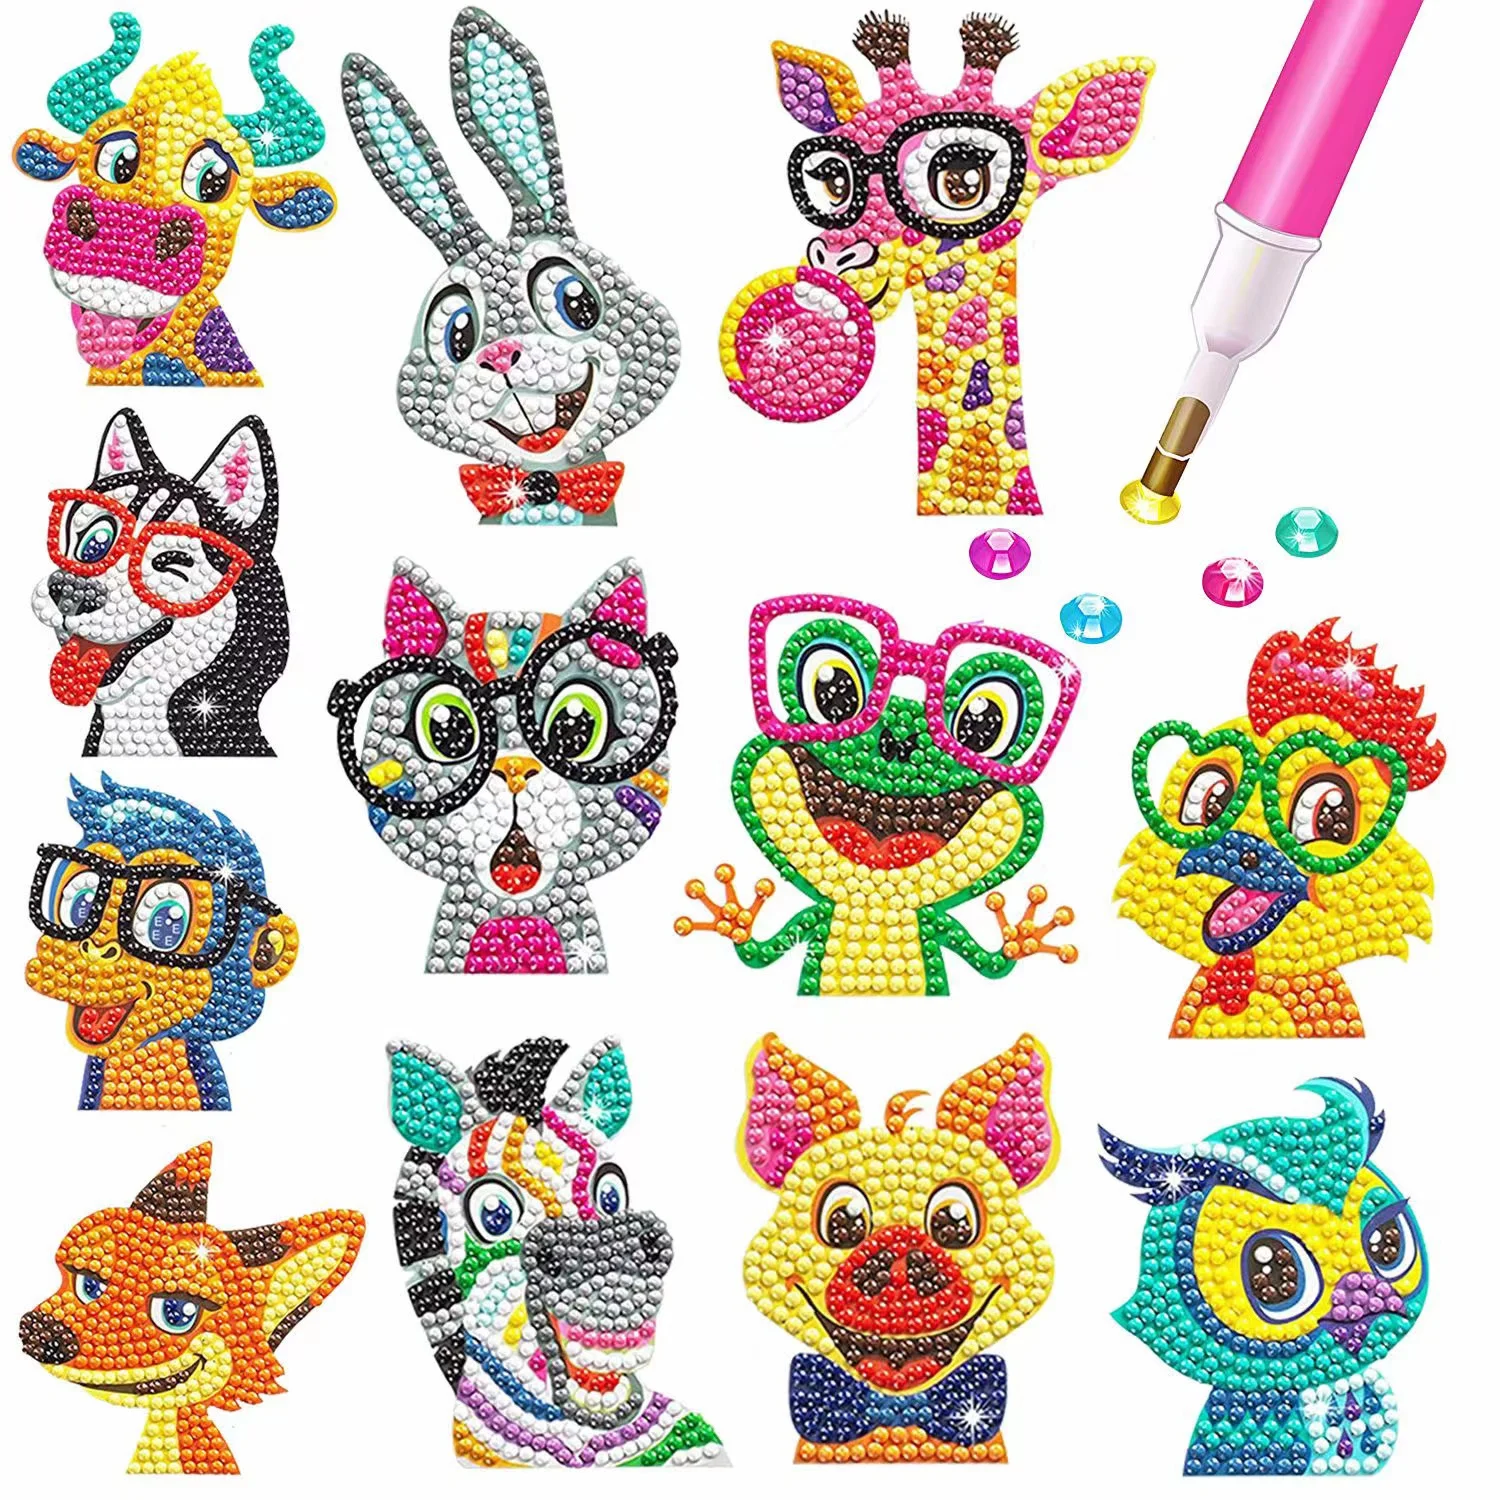 Cartoon Animal 5D Diamond Painting Stickers Kits For Kids Adult Beginners Gem Paint by Numbers Diamond Mosaic Arts Stickers Gift